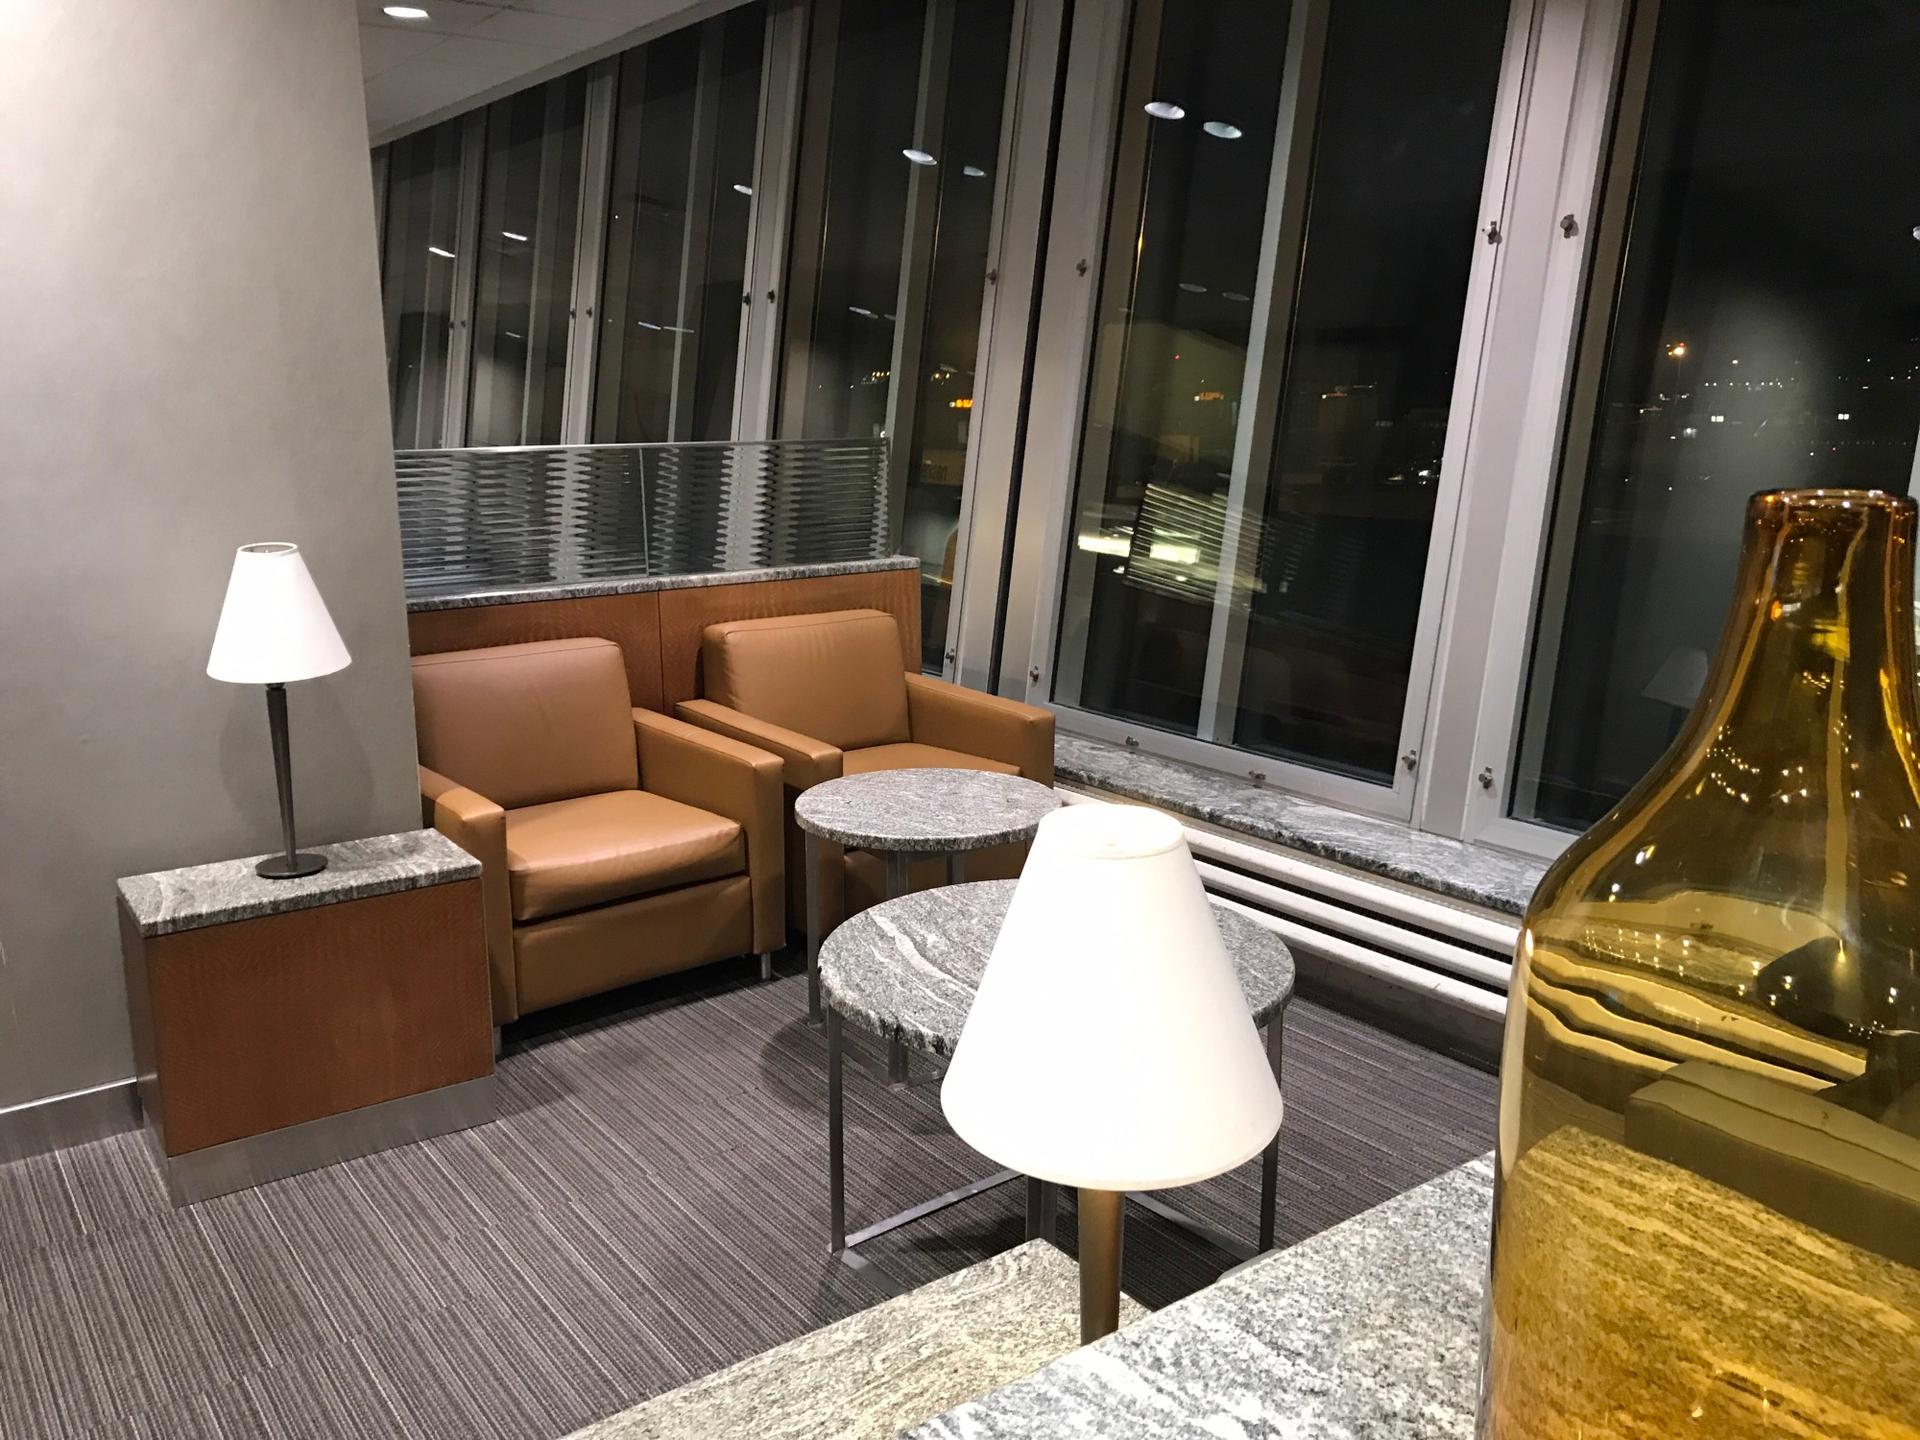 American Airlines Admirals Club image 32 of 48